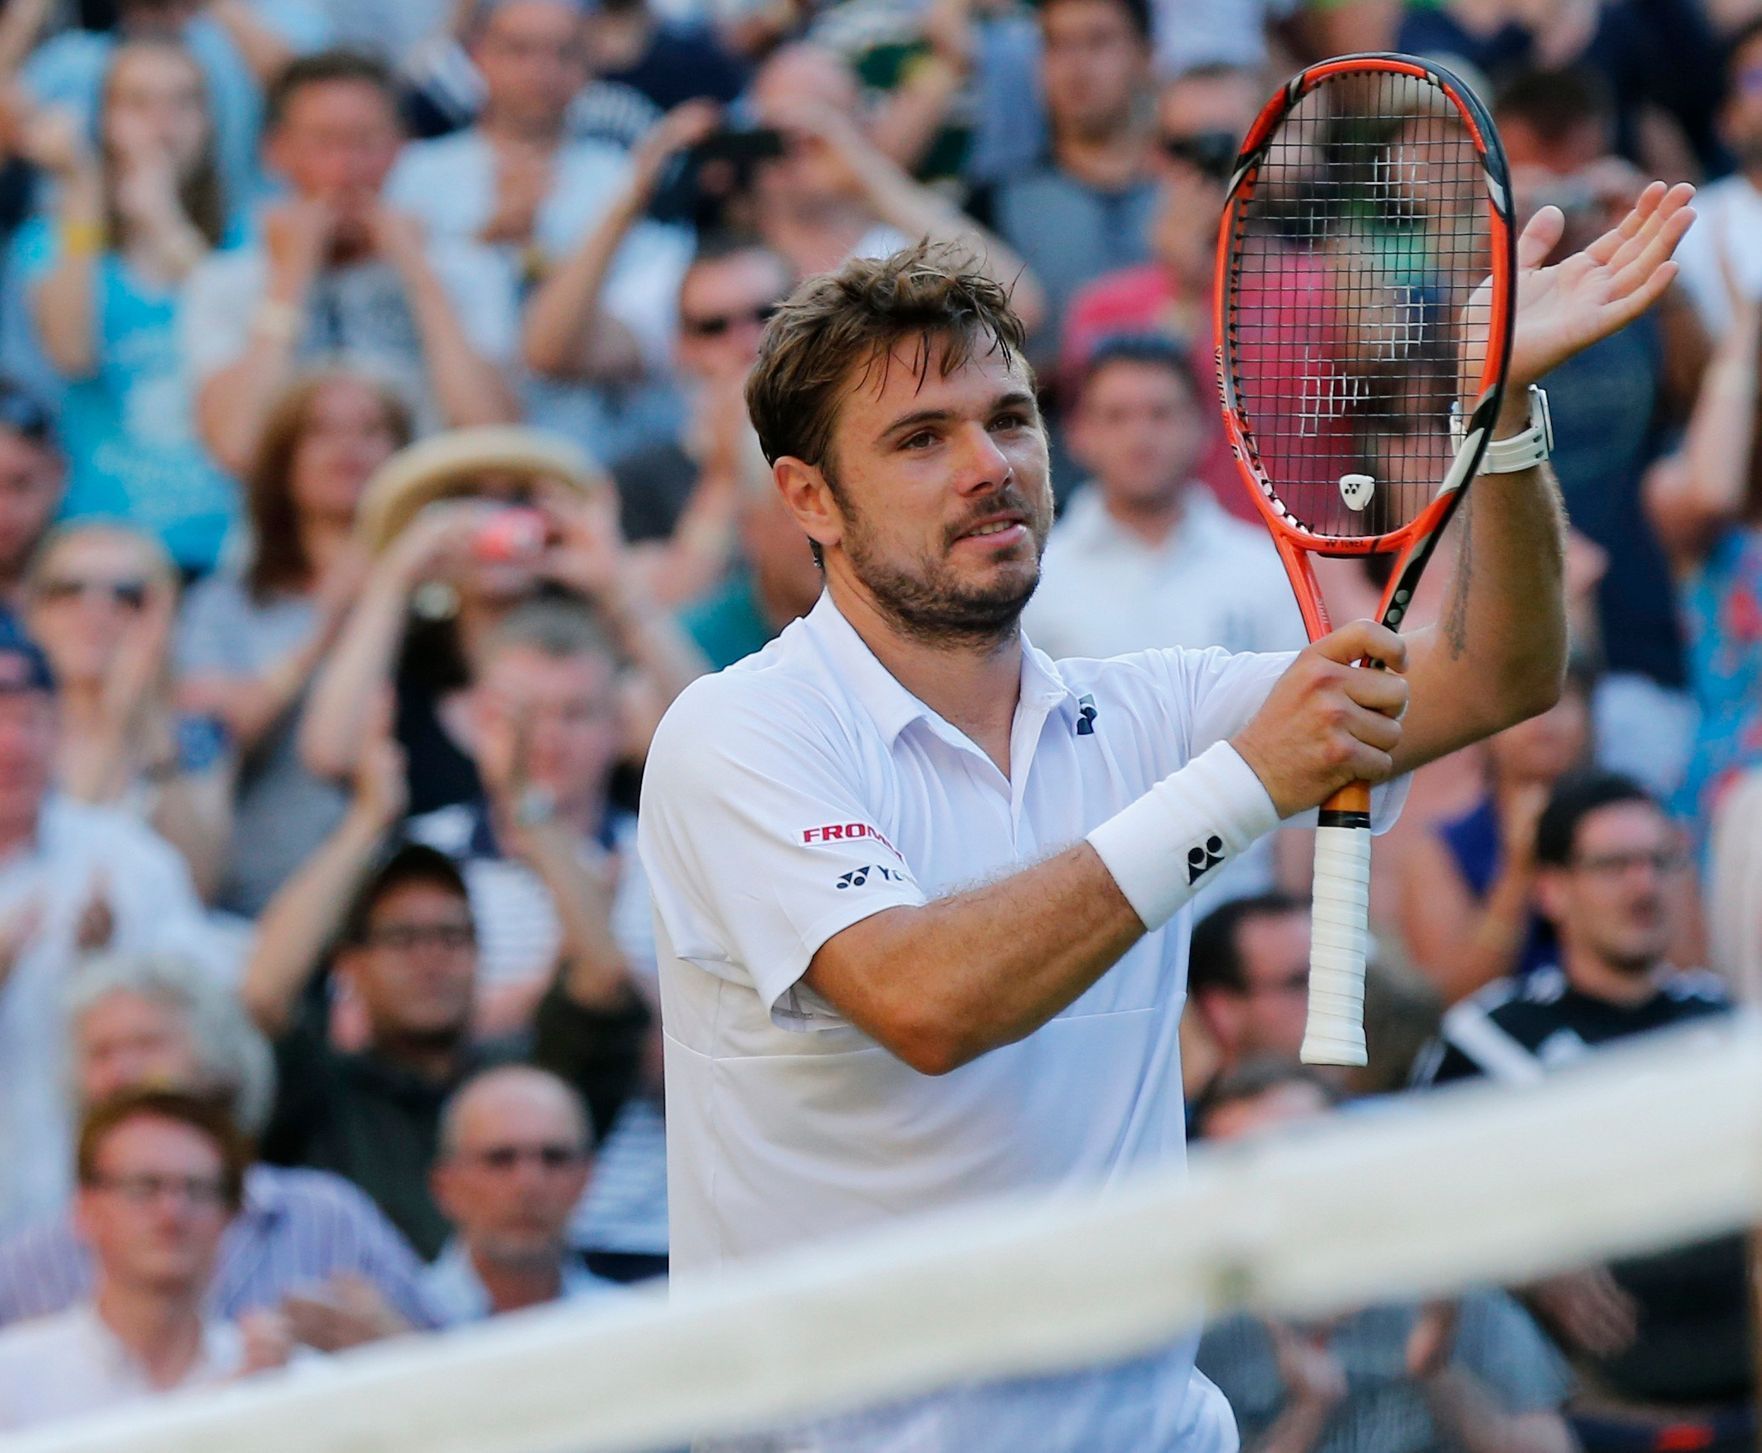 Stan Wawrinka of Switzerland celebrates after winning his match against Joao Sousa of Portugal at the Wimbledon Tennis Championships in London